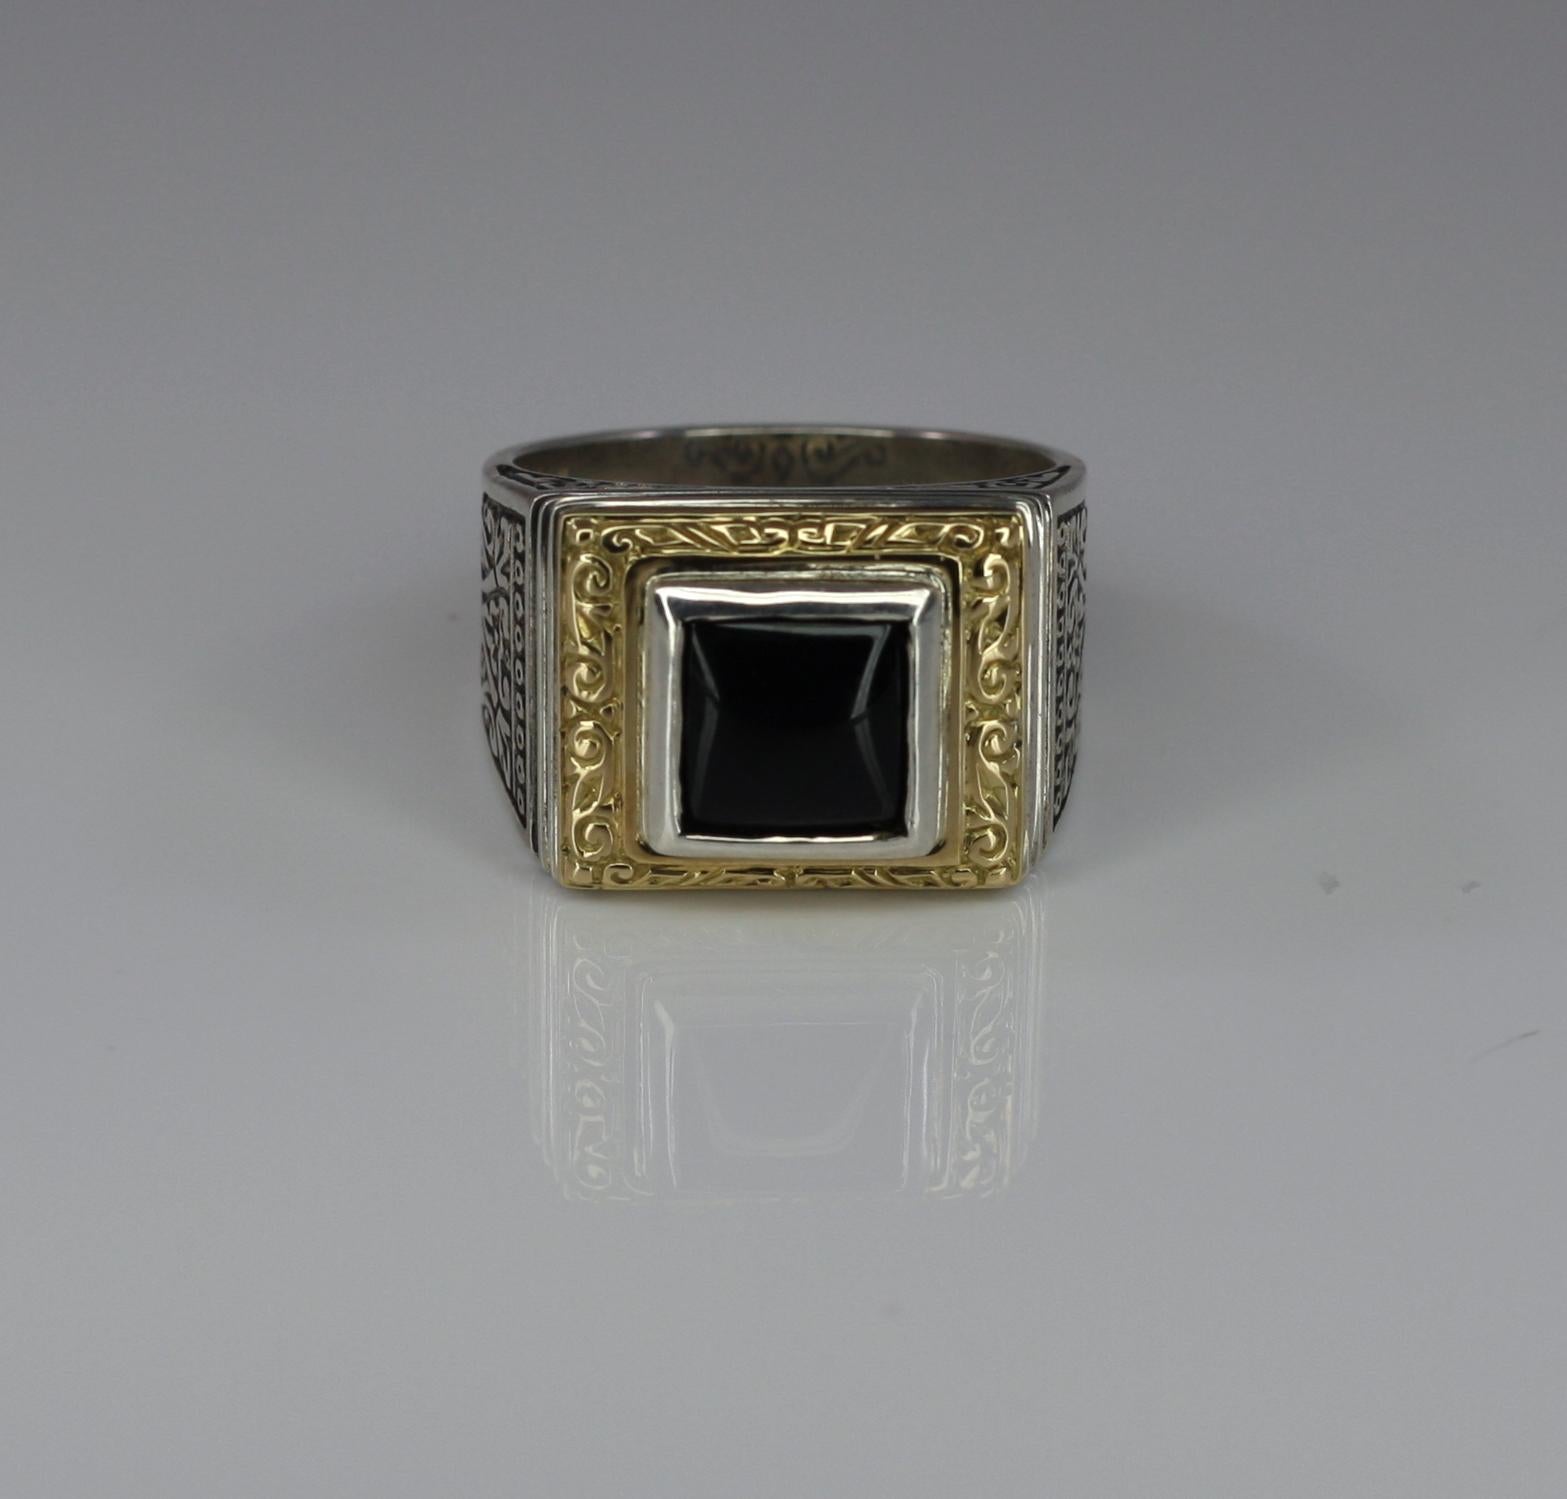 S.Georgios designer unisex all handmade ring crafted from sterling silver and solid 18 Karat yellow gold to create a unique look. The gorgeous ring features a square onyx and is available also with Rubelite.
This stunning piece is outstanding in the